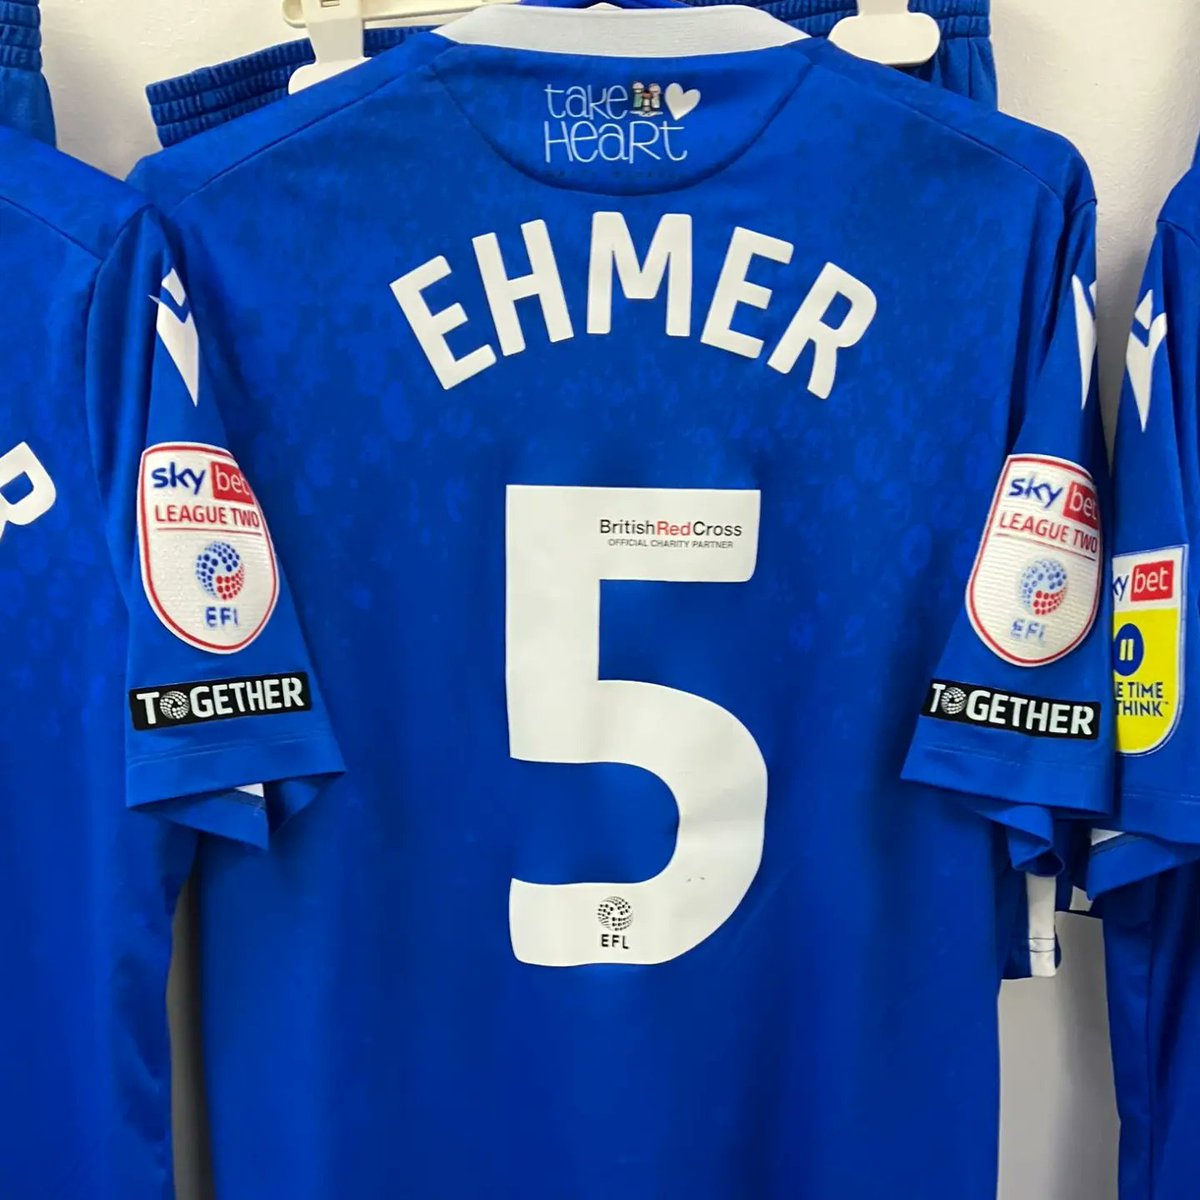 A 𝐇𝐔𝐆𝐄 congratulations to @MaxEhmer who makes his 3️⃣5️⃣0️⃣th appearance for #Gills this afternoon. A superb achievement. 👏👏👏 💙